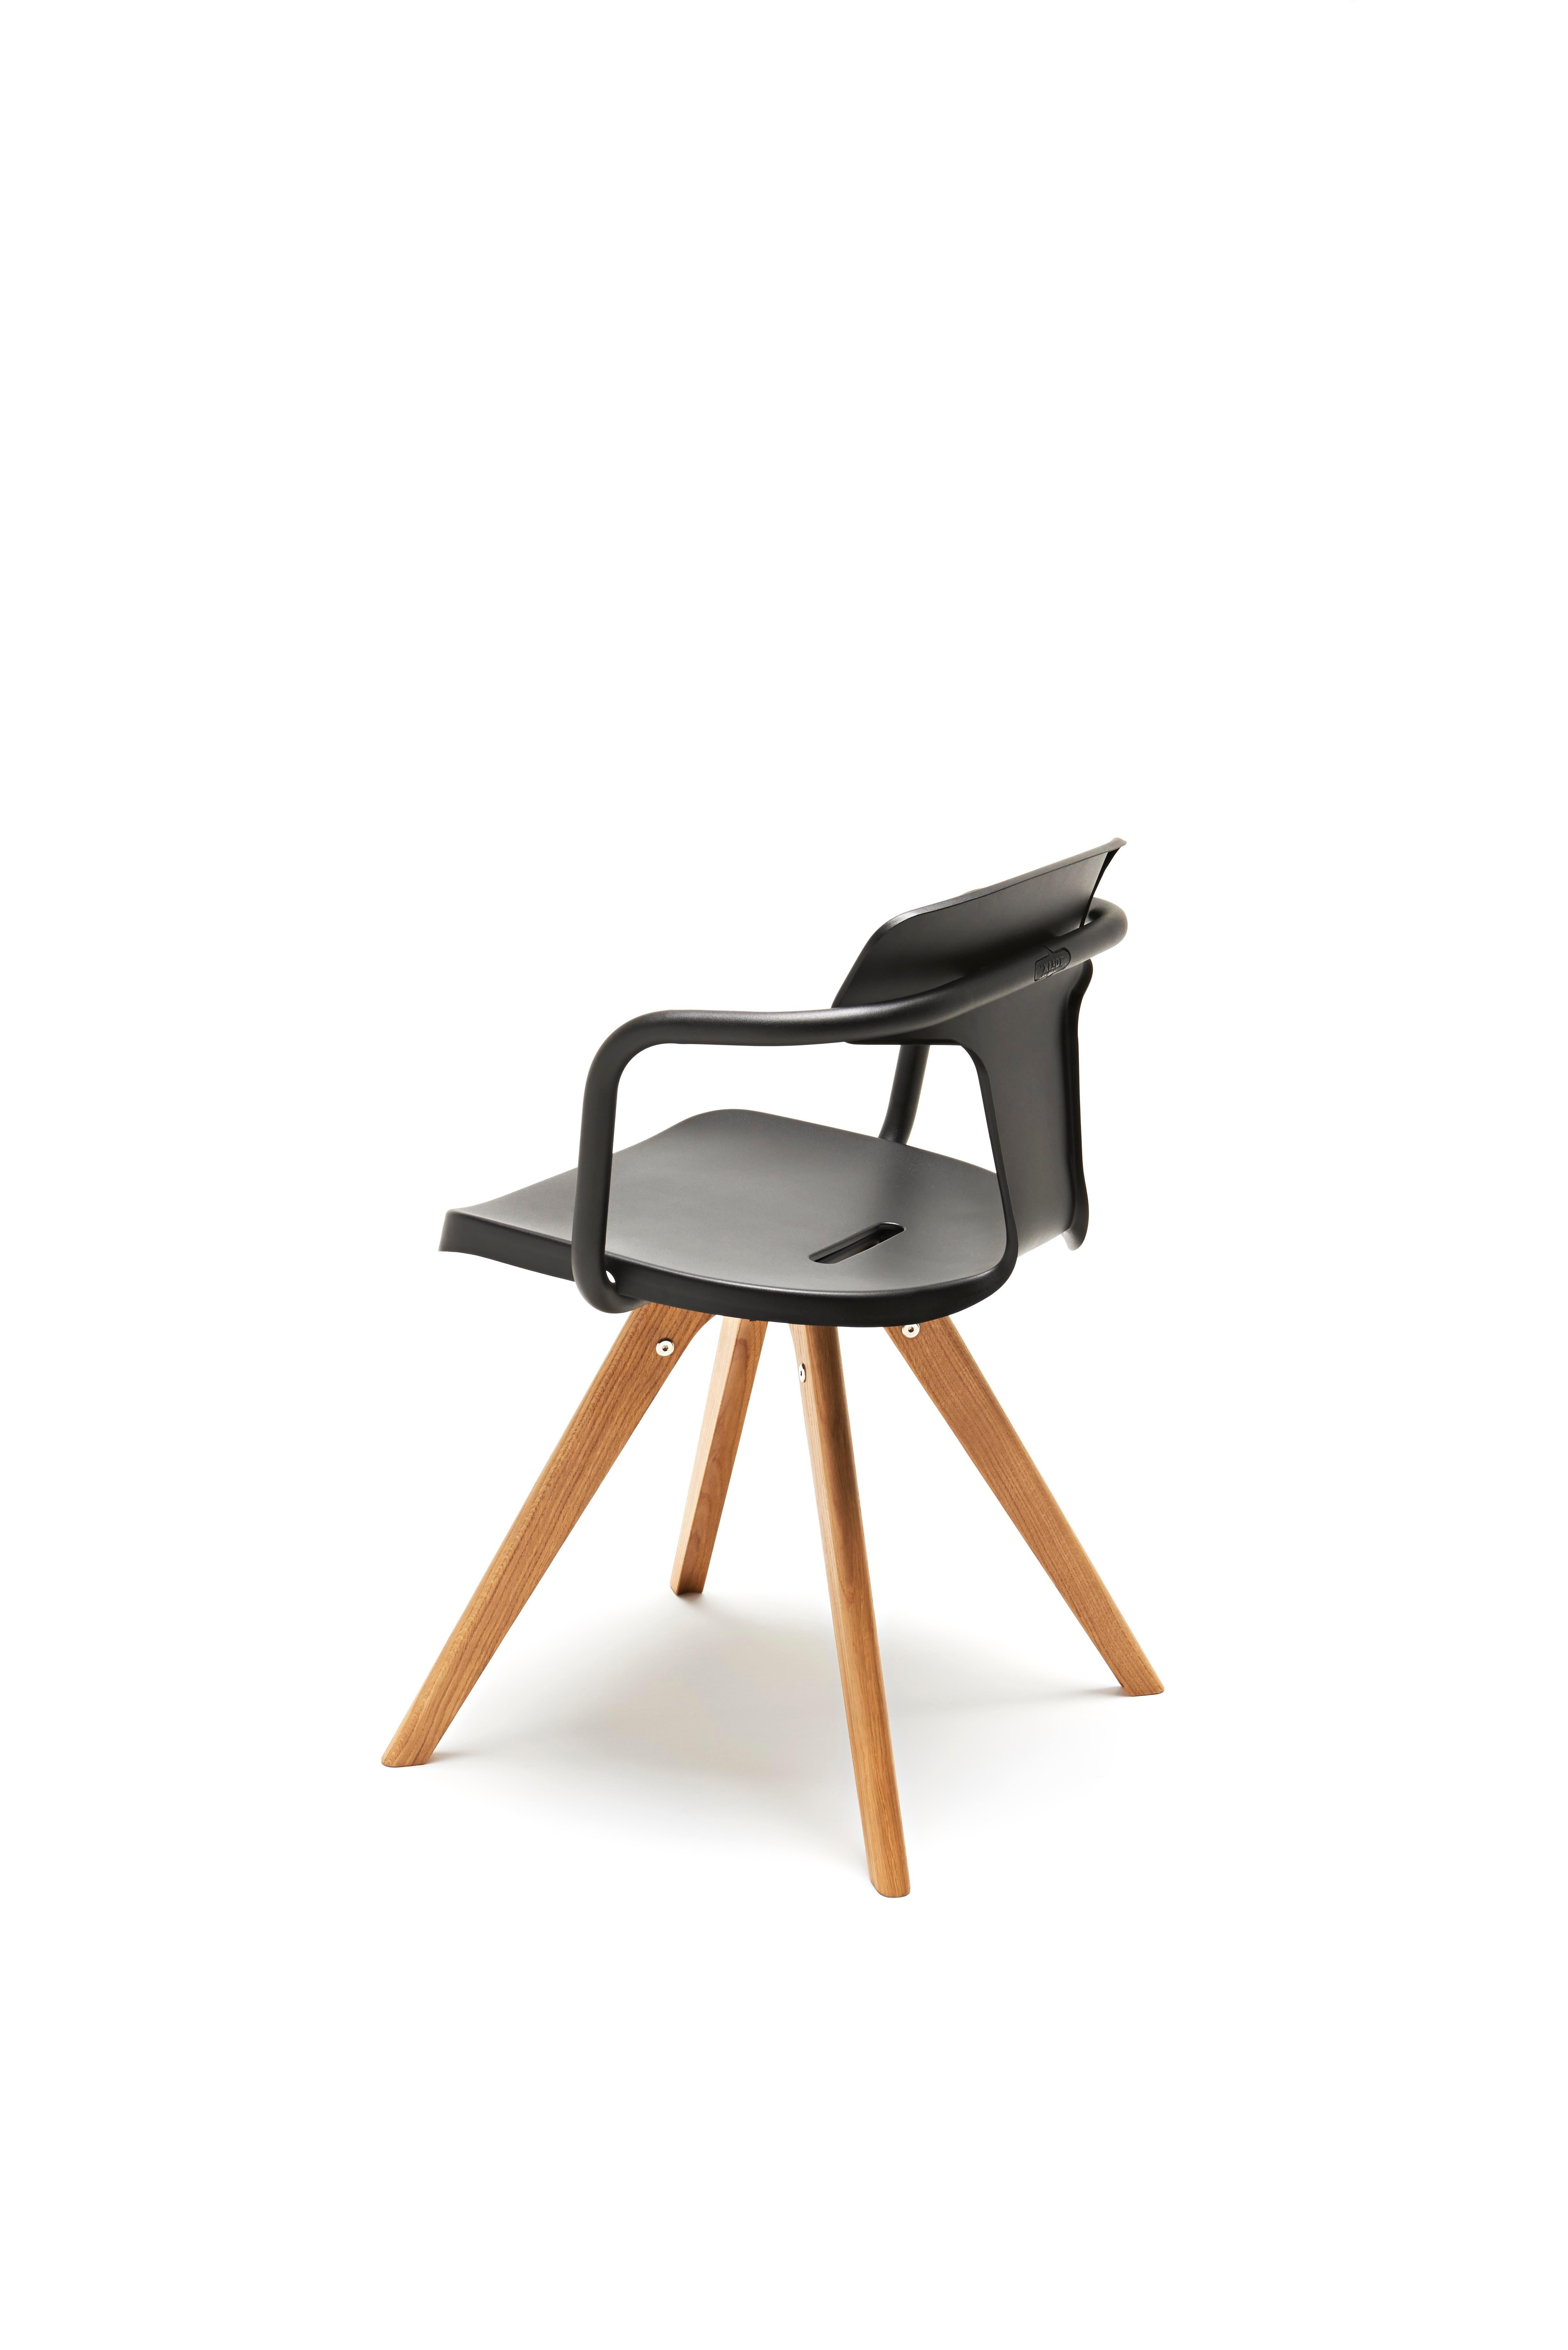 For Sale: Black (Noir) T14 Chair with Wood Legs in Essential Colors by Patrick Norguet and Tolix 2